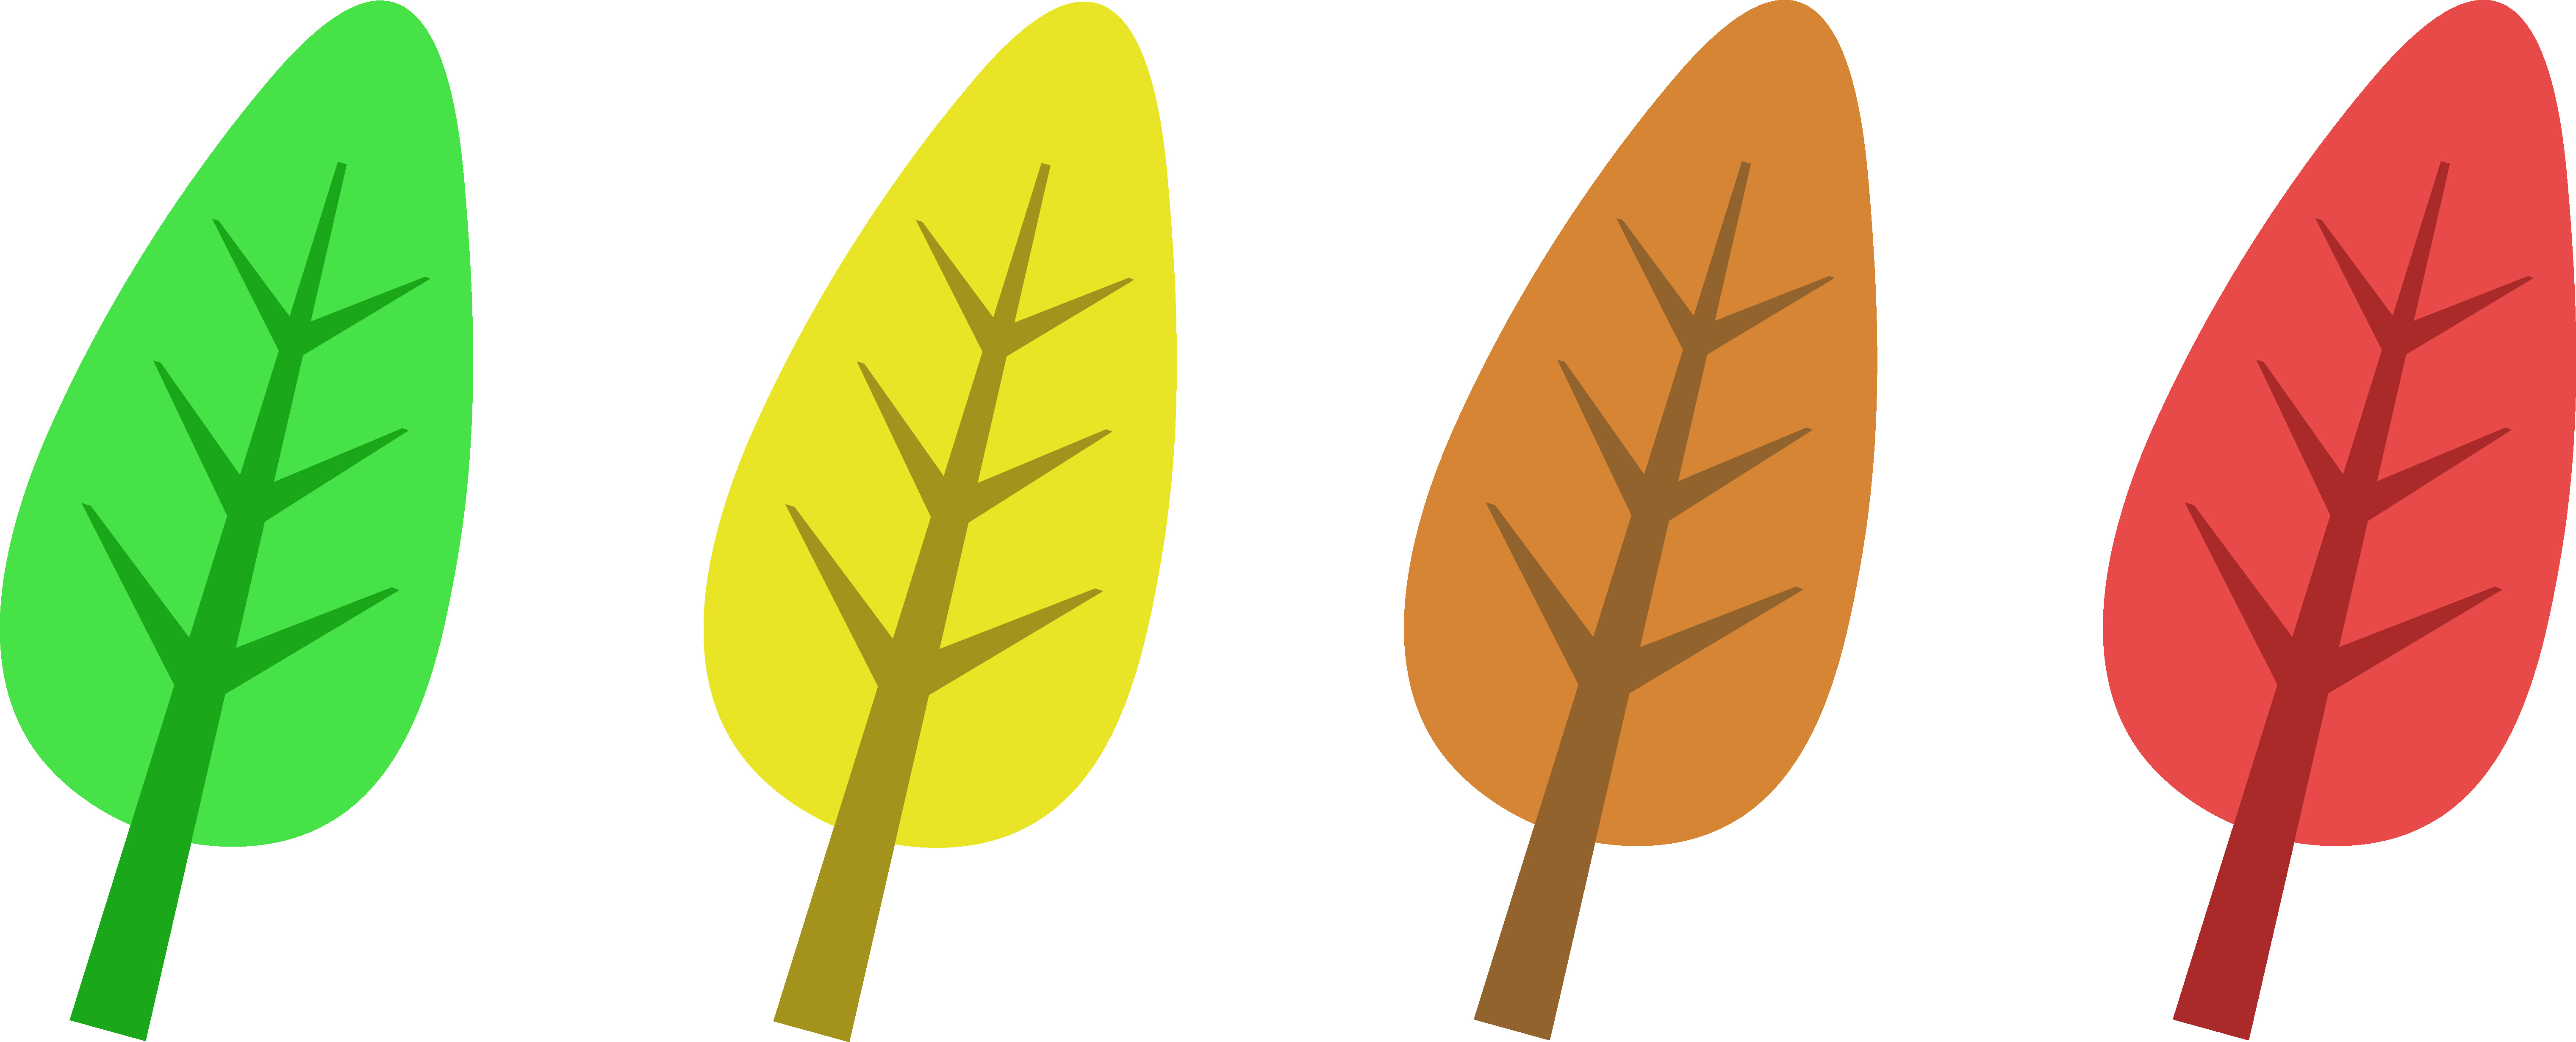 Tree Without Leaves Clipart at GetDrawings | Free download